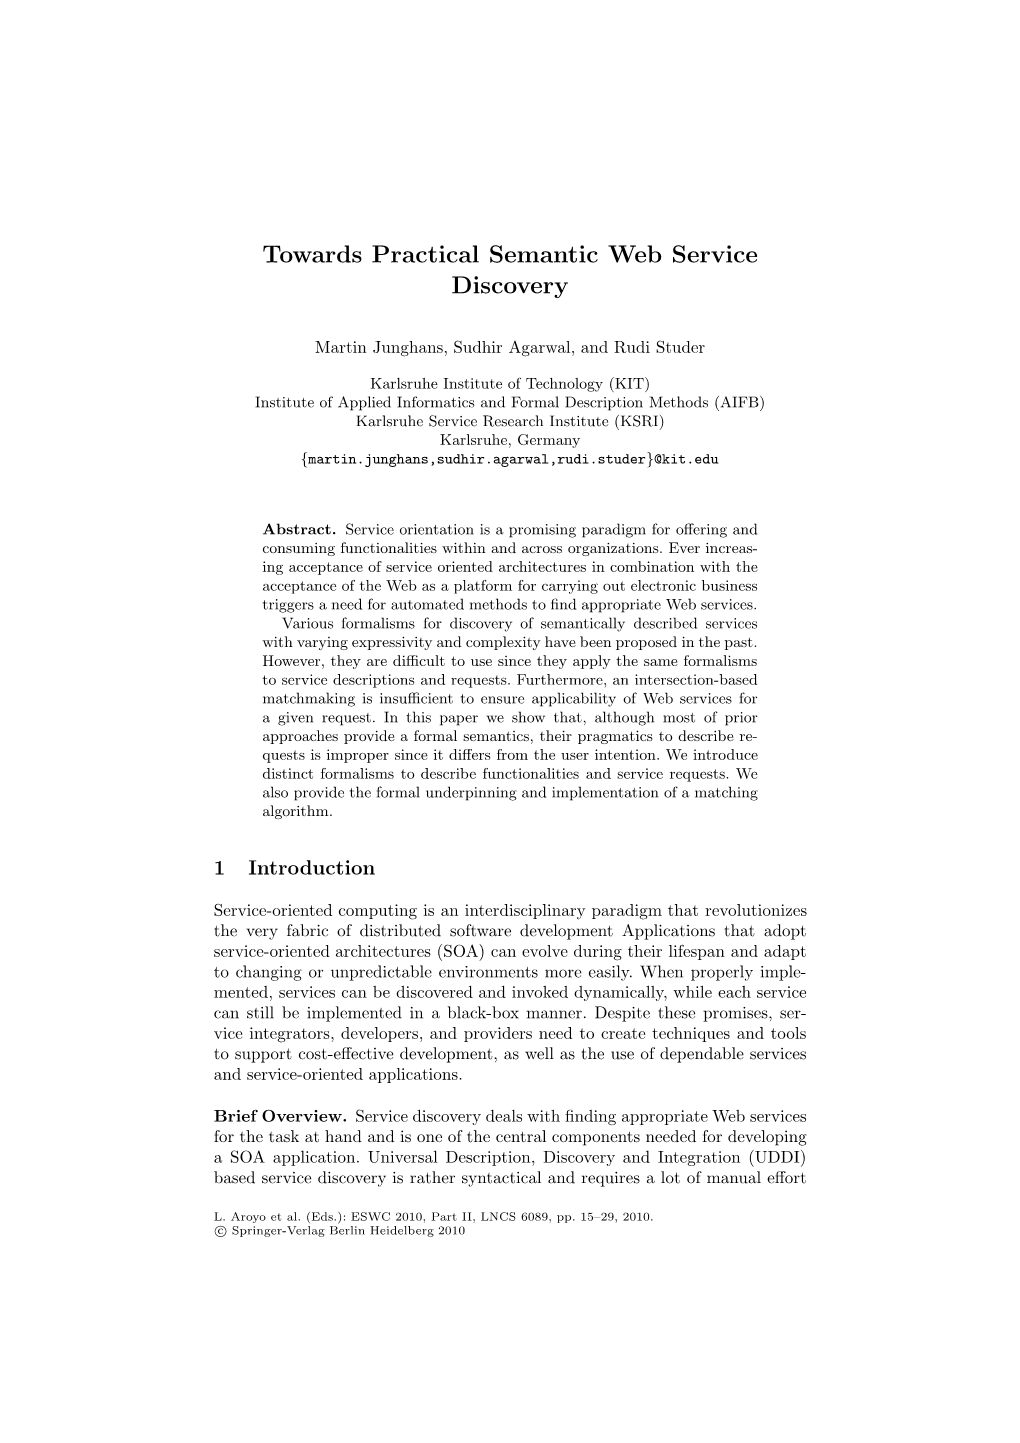 Towards Practical Semantic Web Service Discovery